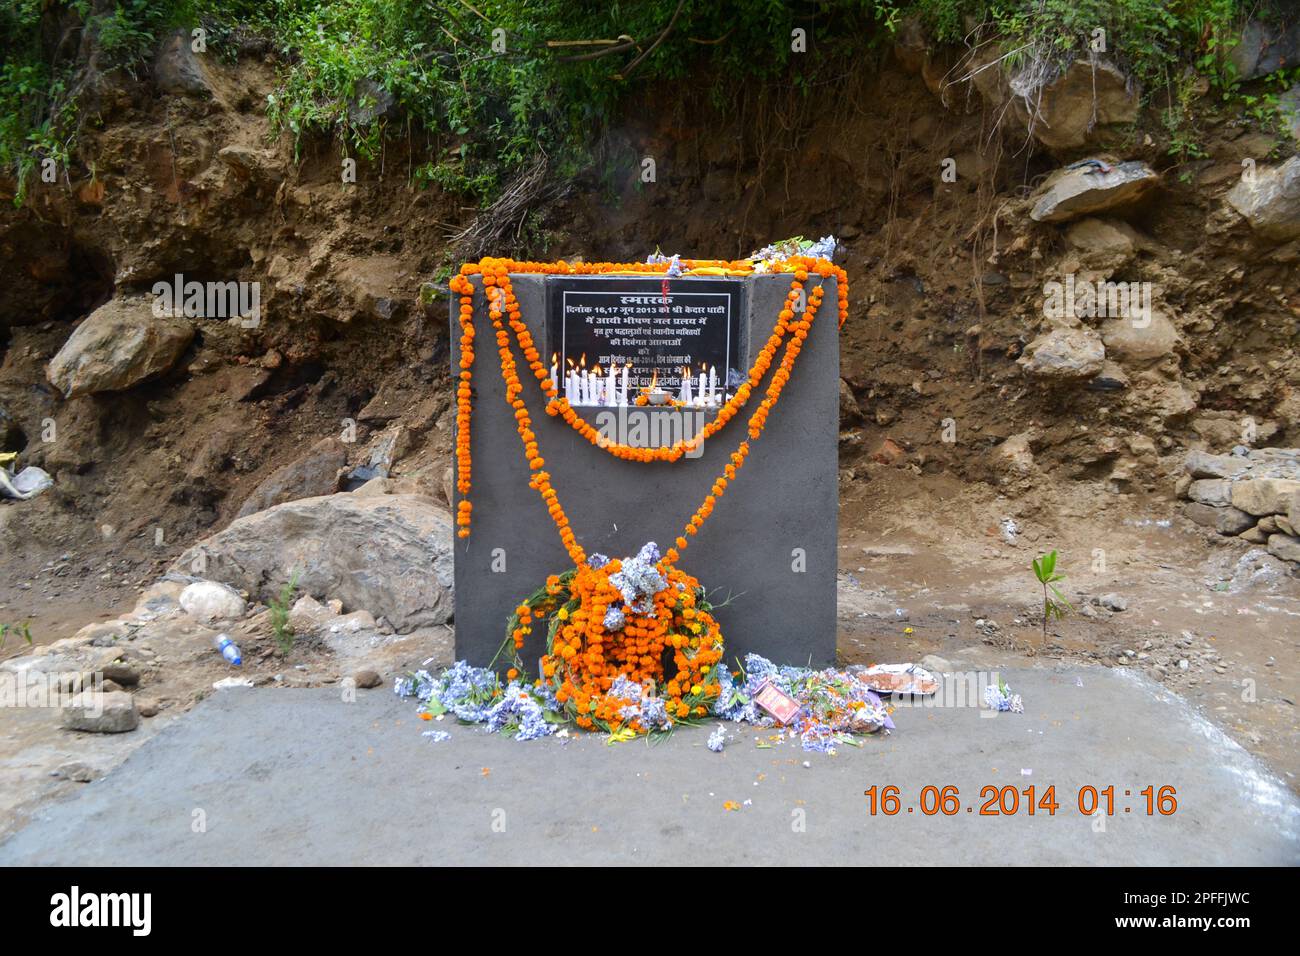 A Memorial site for the victims of Kedarnath disaster. In June 2013, a multi-day cloudburst centered on the North Indian state of Uttarakhand caused d Stock Photo